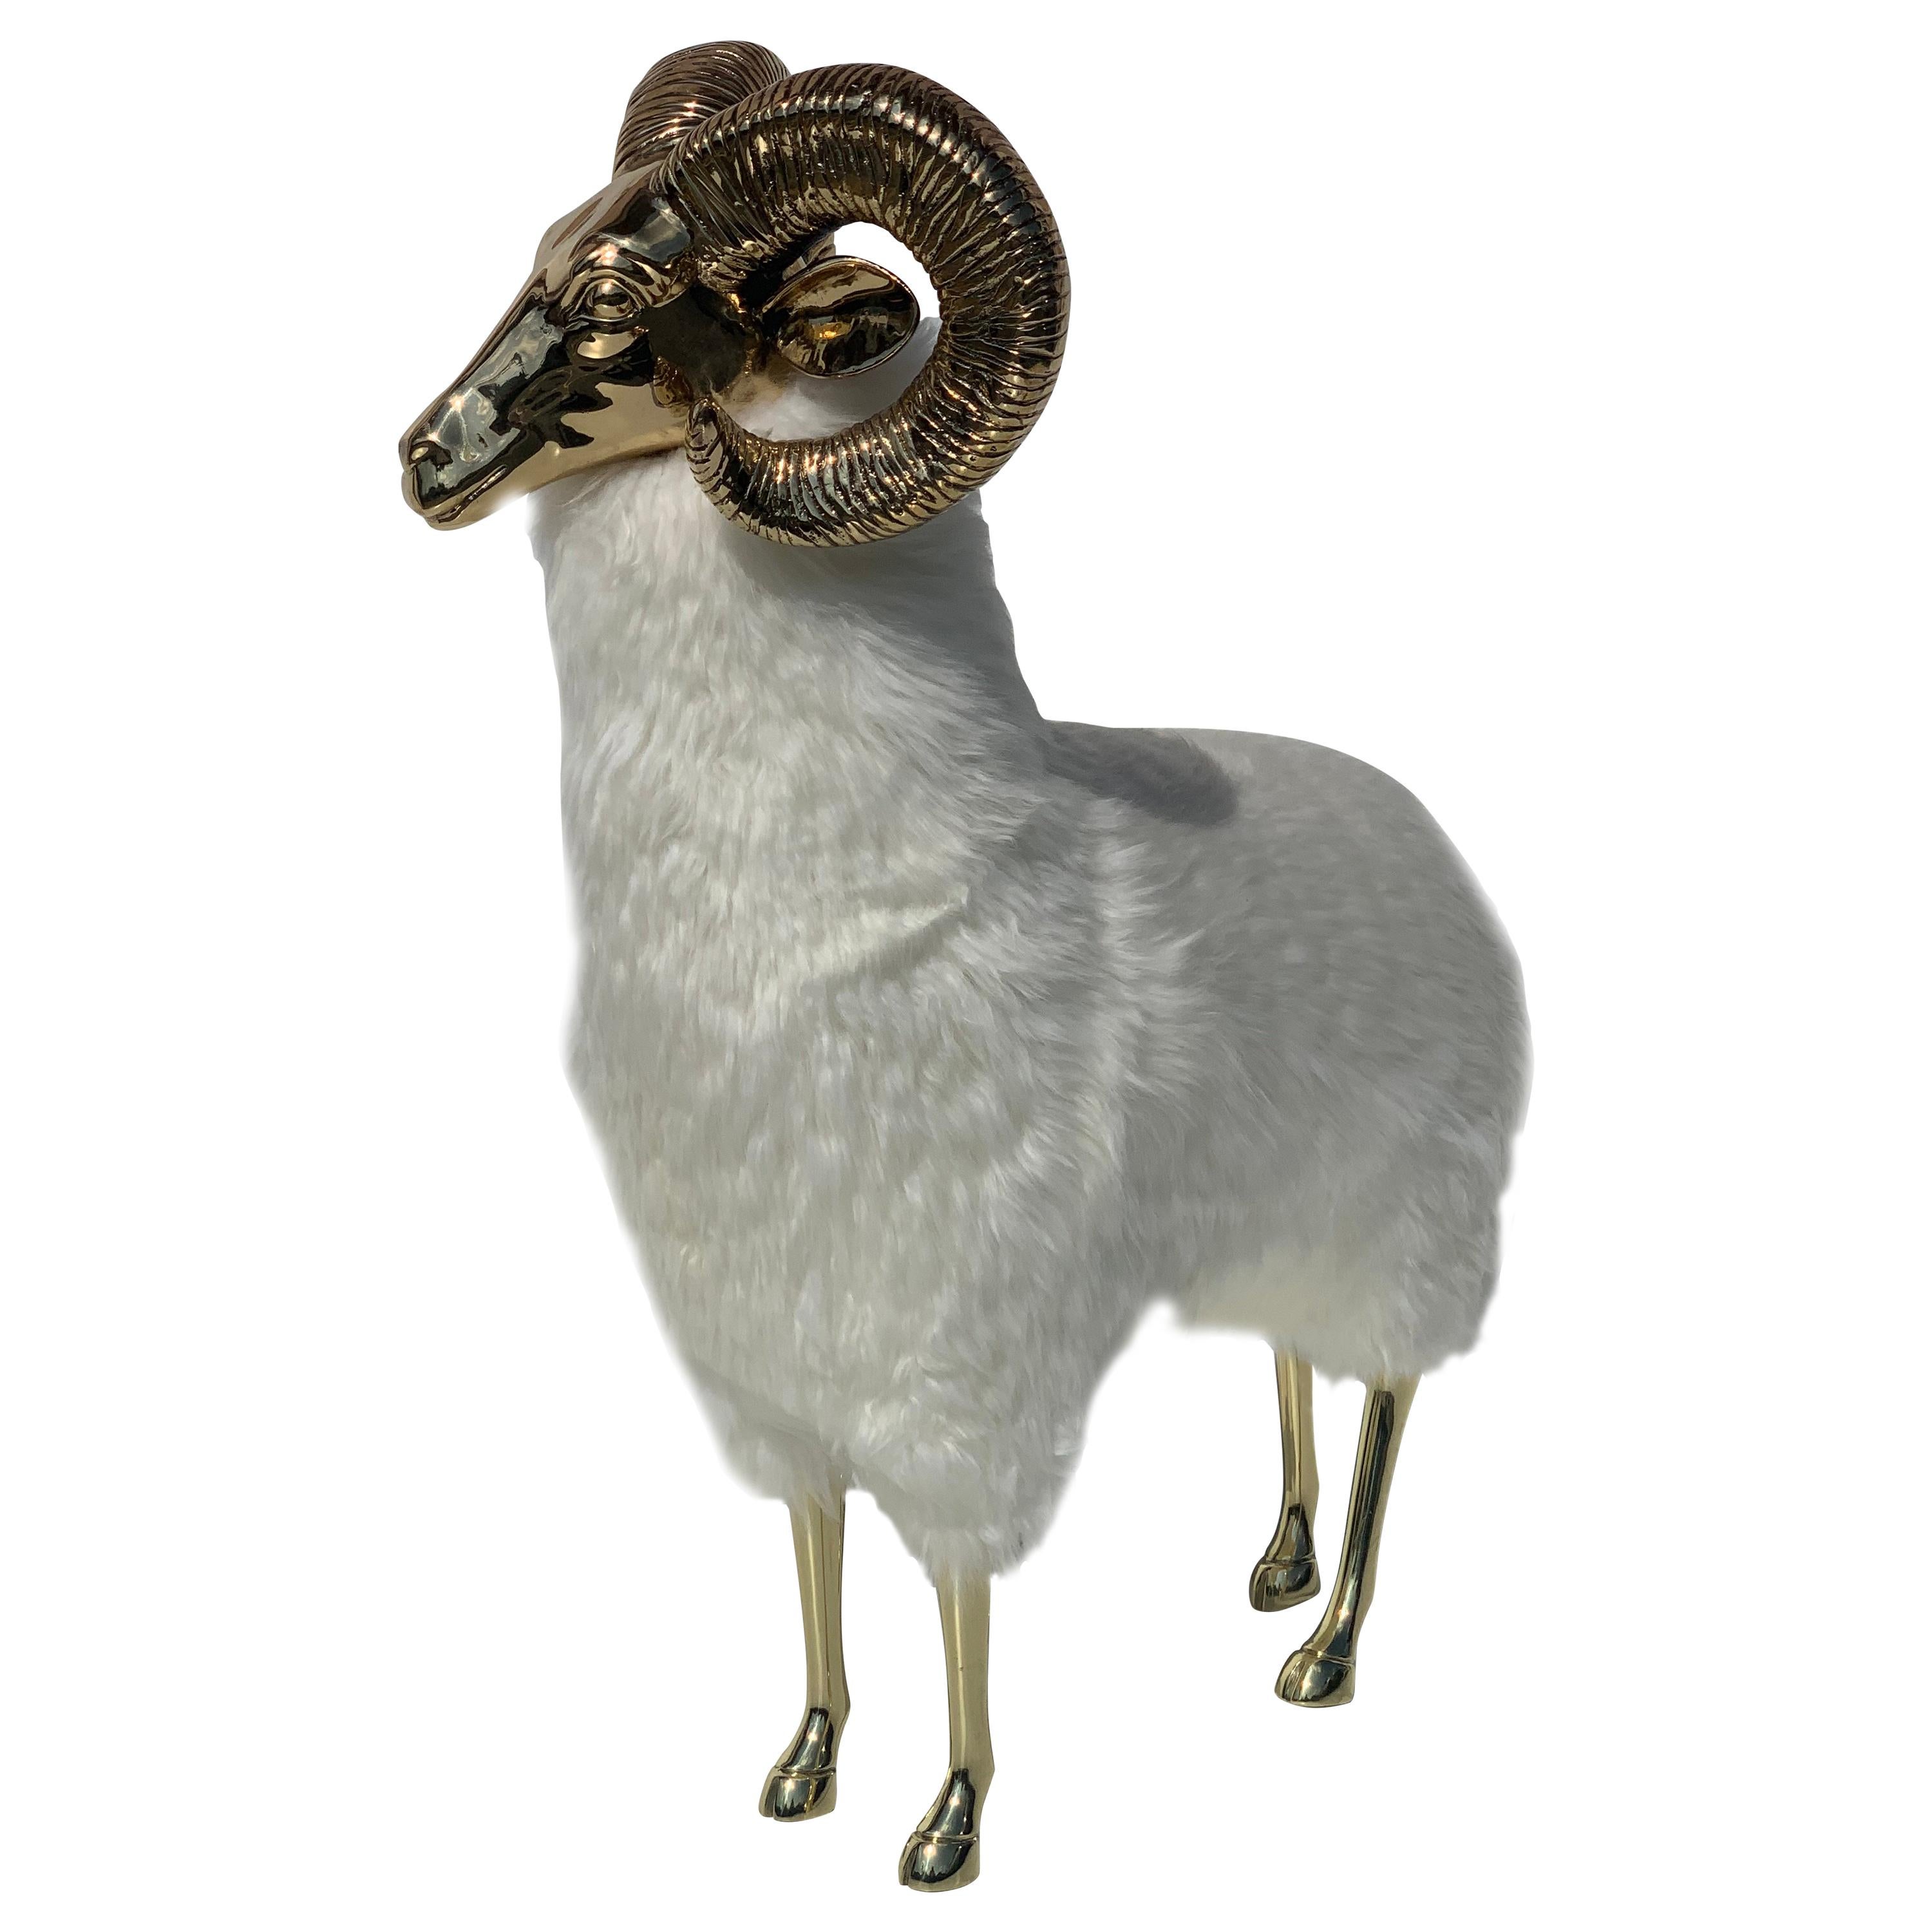 Polished Brass Ram or Sheep Sculpture